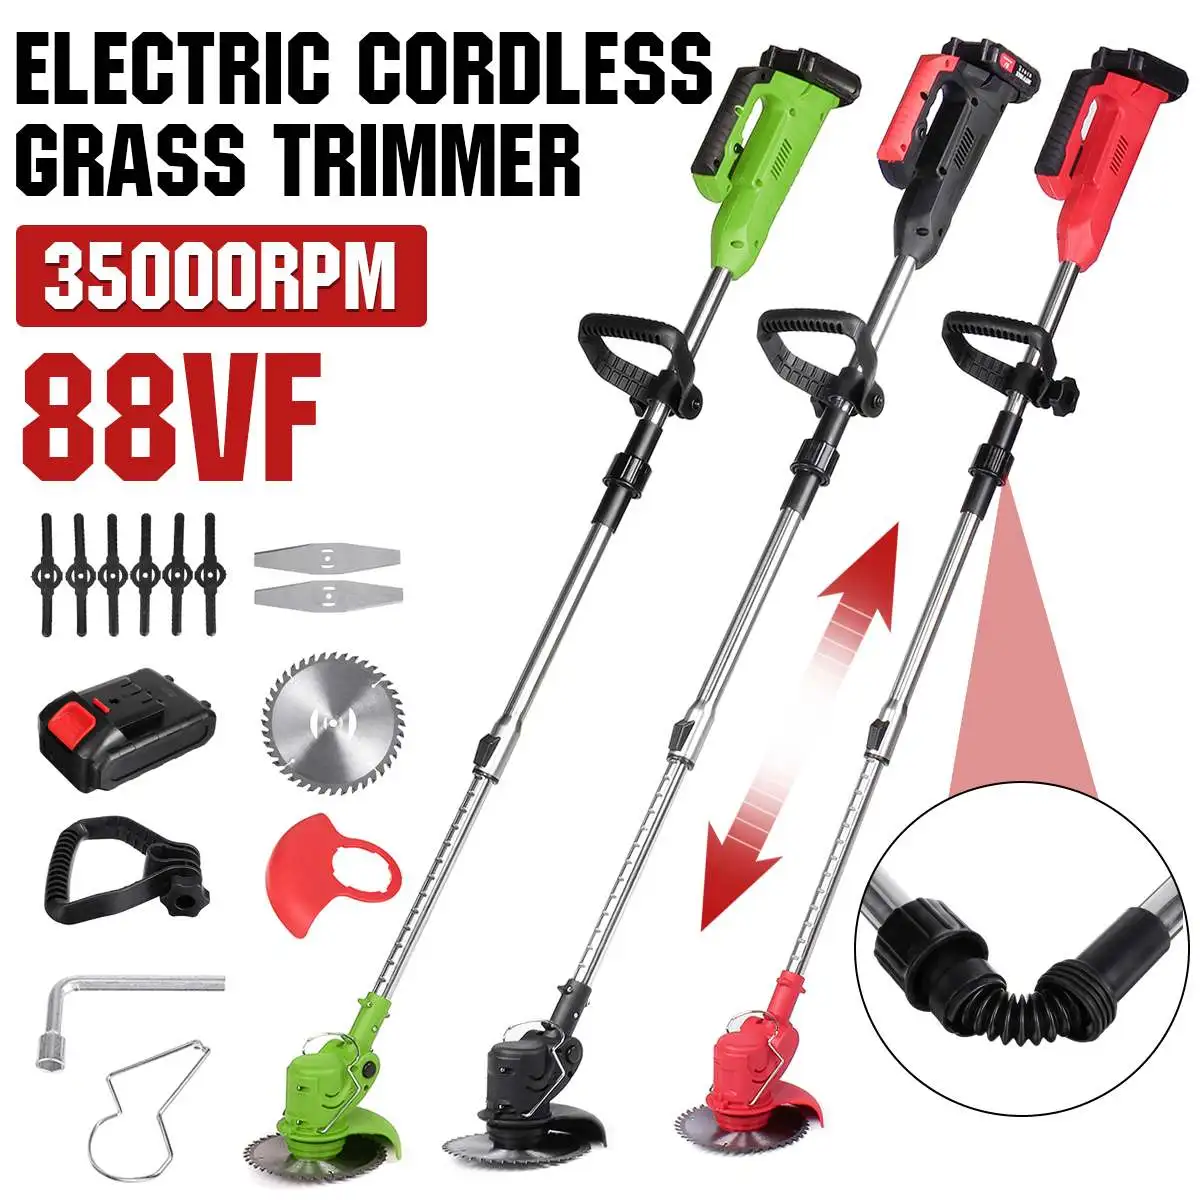 Wolike 2000W Electric Lawn Mower 24V Cordless Hedge Grass Trimmer Adjustable Handheld Mowing Machine Garden Power Tool 2 Battery